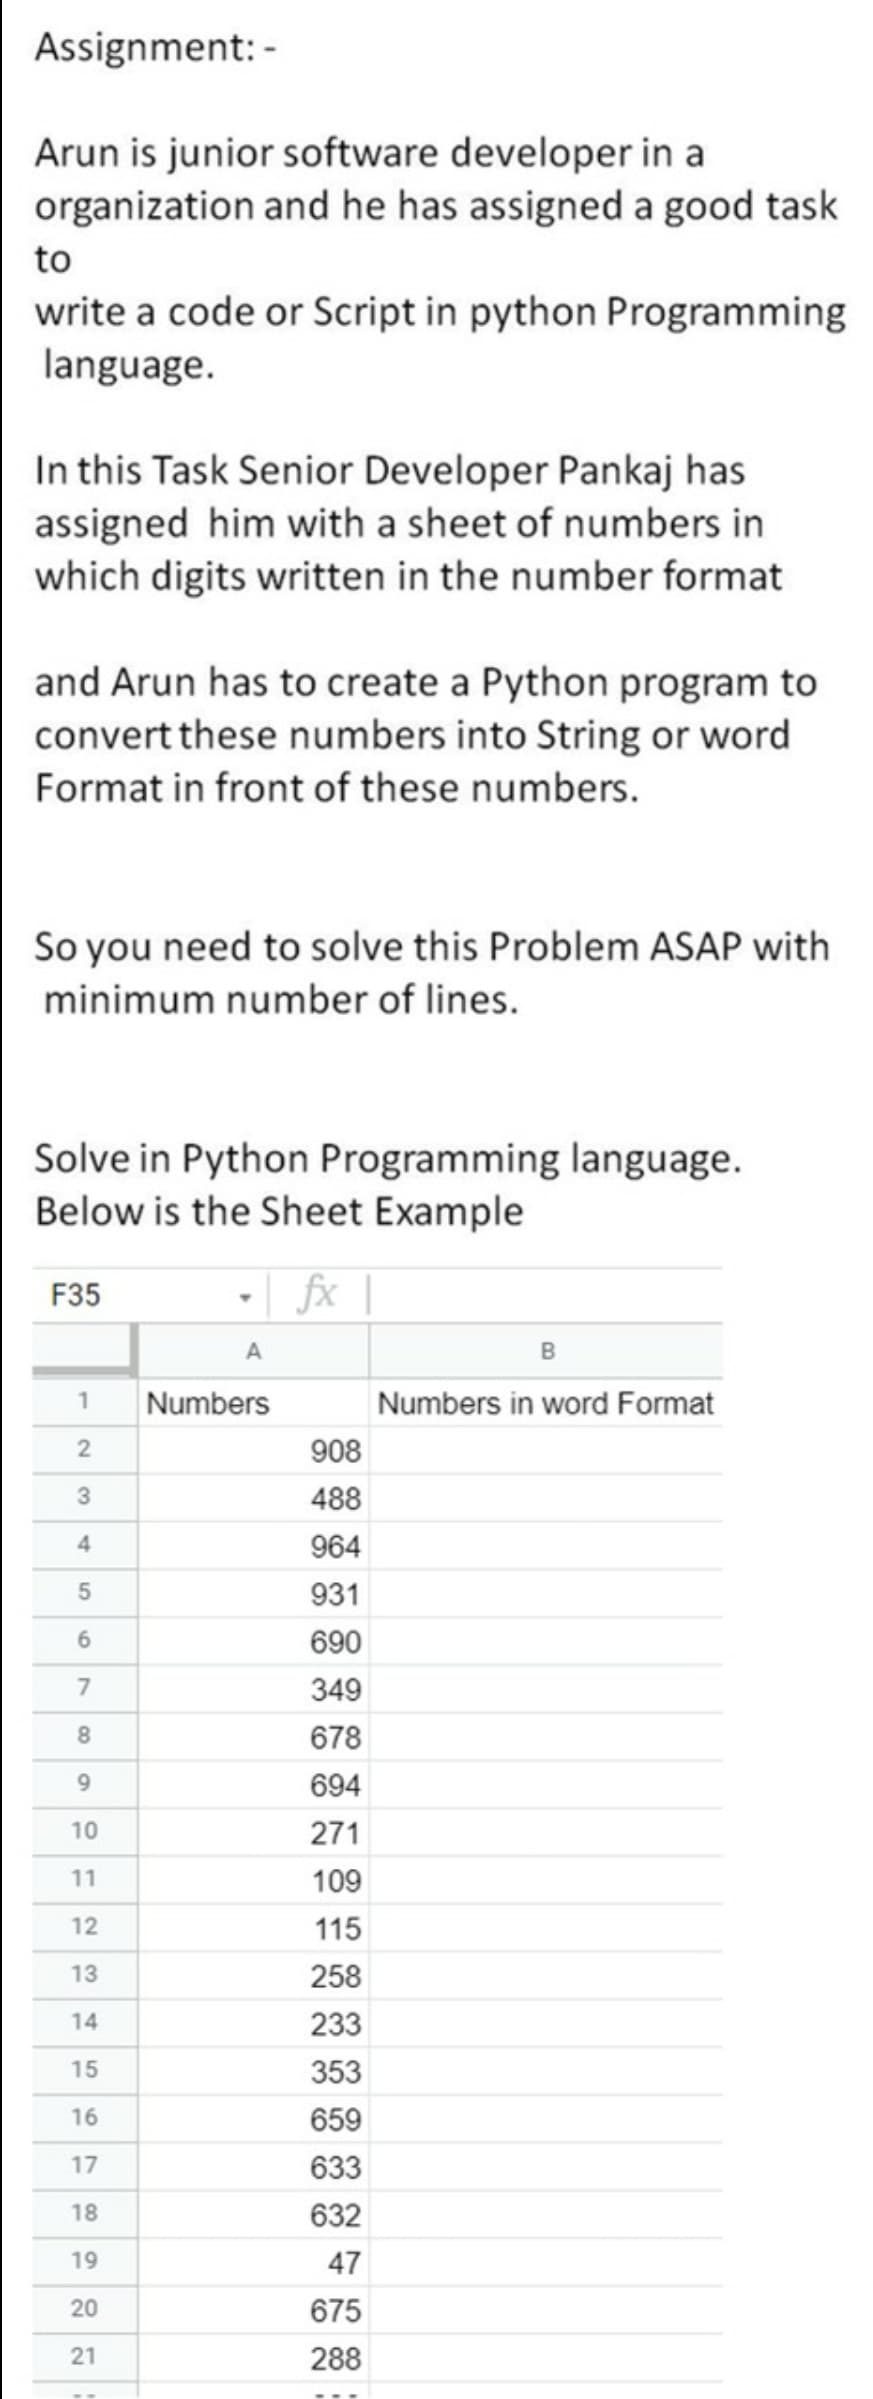 Assignment: -
Arun is junior software developer in a
organization and he has assigned a good task
to
write a code or Script in python Programming
language.
In this Task Senior Developer Pankaj has
assigned him with a sheet of numbers in
which digits written in the number format
and Arun has to create a Python program to
convert these numbers into String or word
Format in front of these numbers.
So you need to solve this Problem ASAP with
minimum number of lines.
Solve in Python Programming language.
Below is the Sheet Example
- | fx |
F35
Numbers
Numbers in word Format
908
488
4
964
931
690
349
8
678
9.
694
10
271
11
109
12
115
13
258
14
233
15
353
16
659
17
633
18
632
19
47
675
21
288
7.
20
2.
3.
